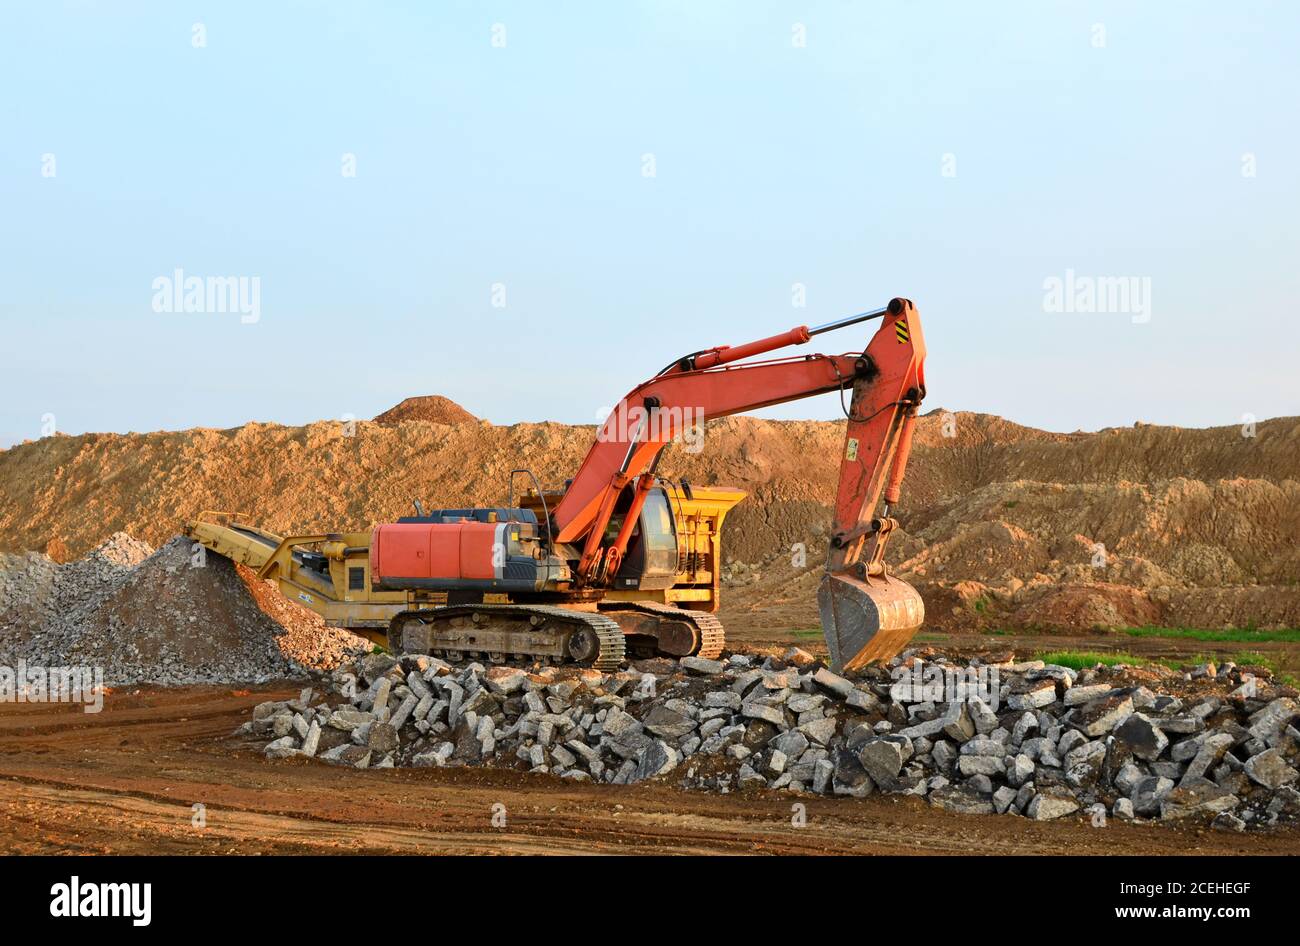 Heavy tracked excavator load stone, old asphalt or concrete waste into a mobile jaw crusher machine. Crushing and processing into gravel for recycling Stock Photo